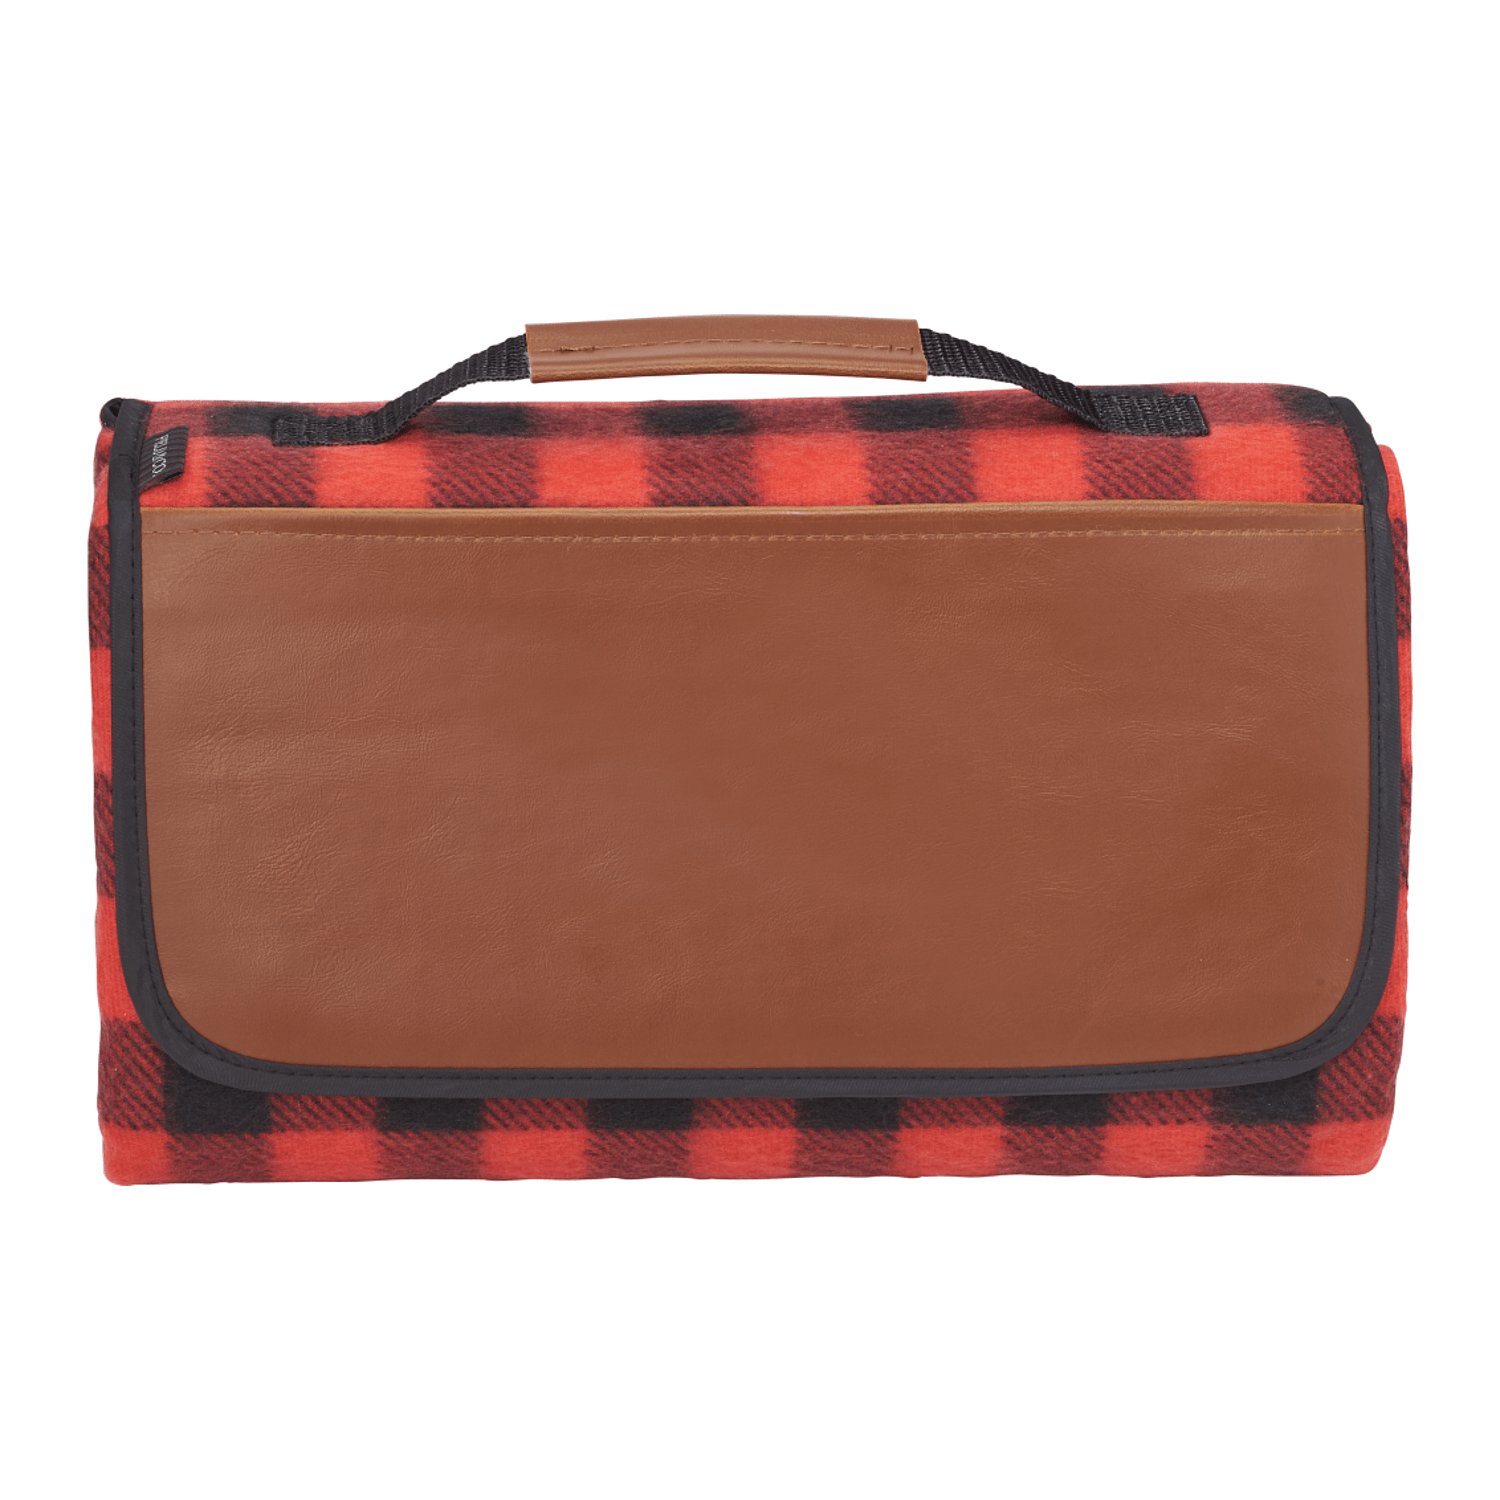 Field & Co Accessories One Size / Red/Black Field & Co. - Buffalo Plaid Picnic Blanket